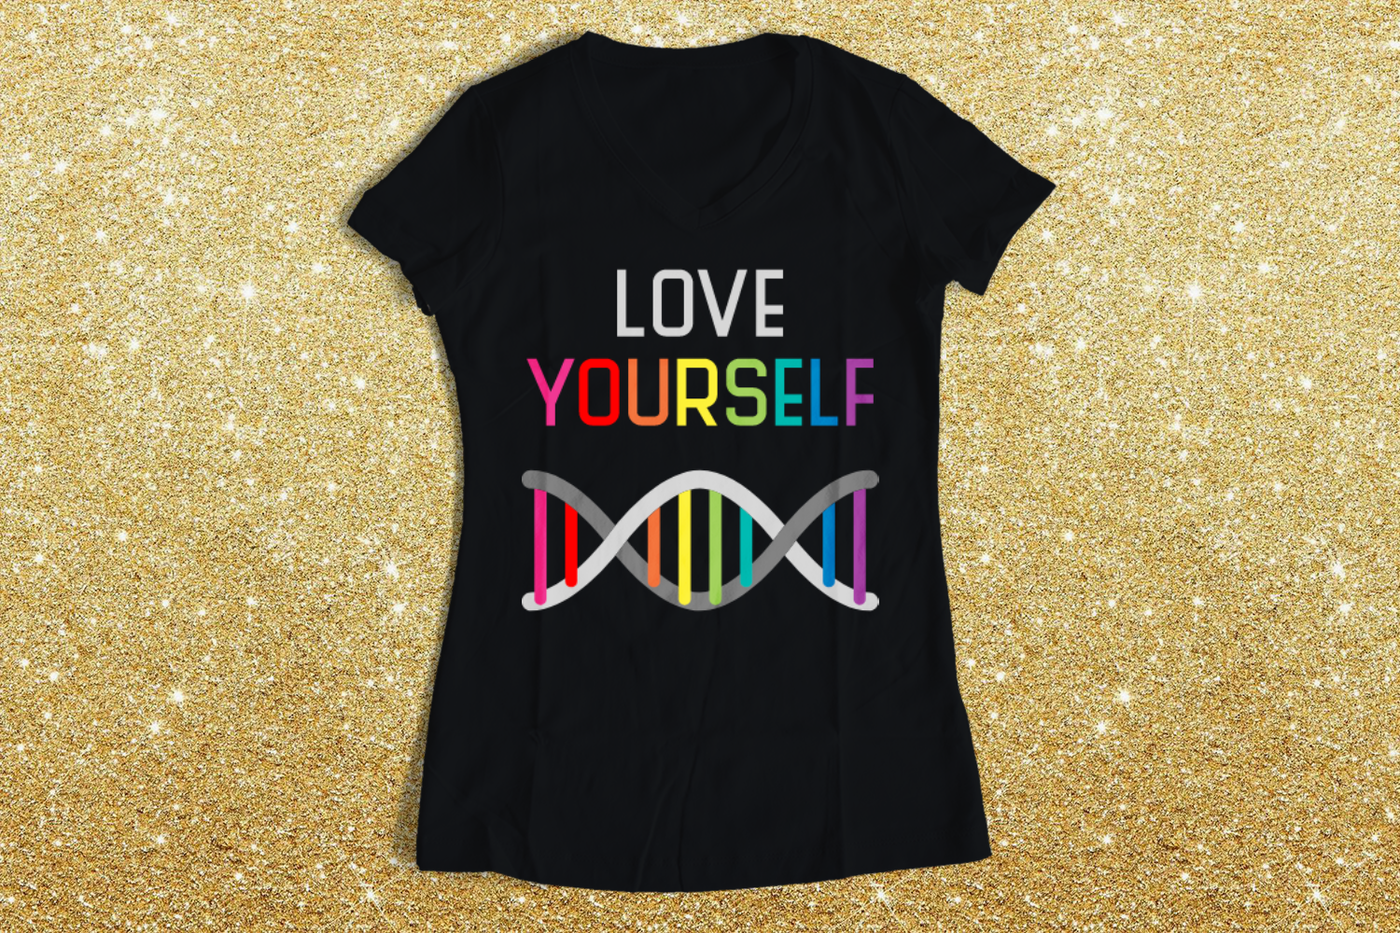 Shirt that says "Love Yourself" with a strand of DNA below. "Yourself" and the DNA are in rainbow colors.